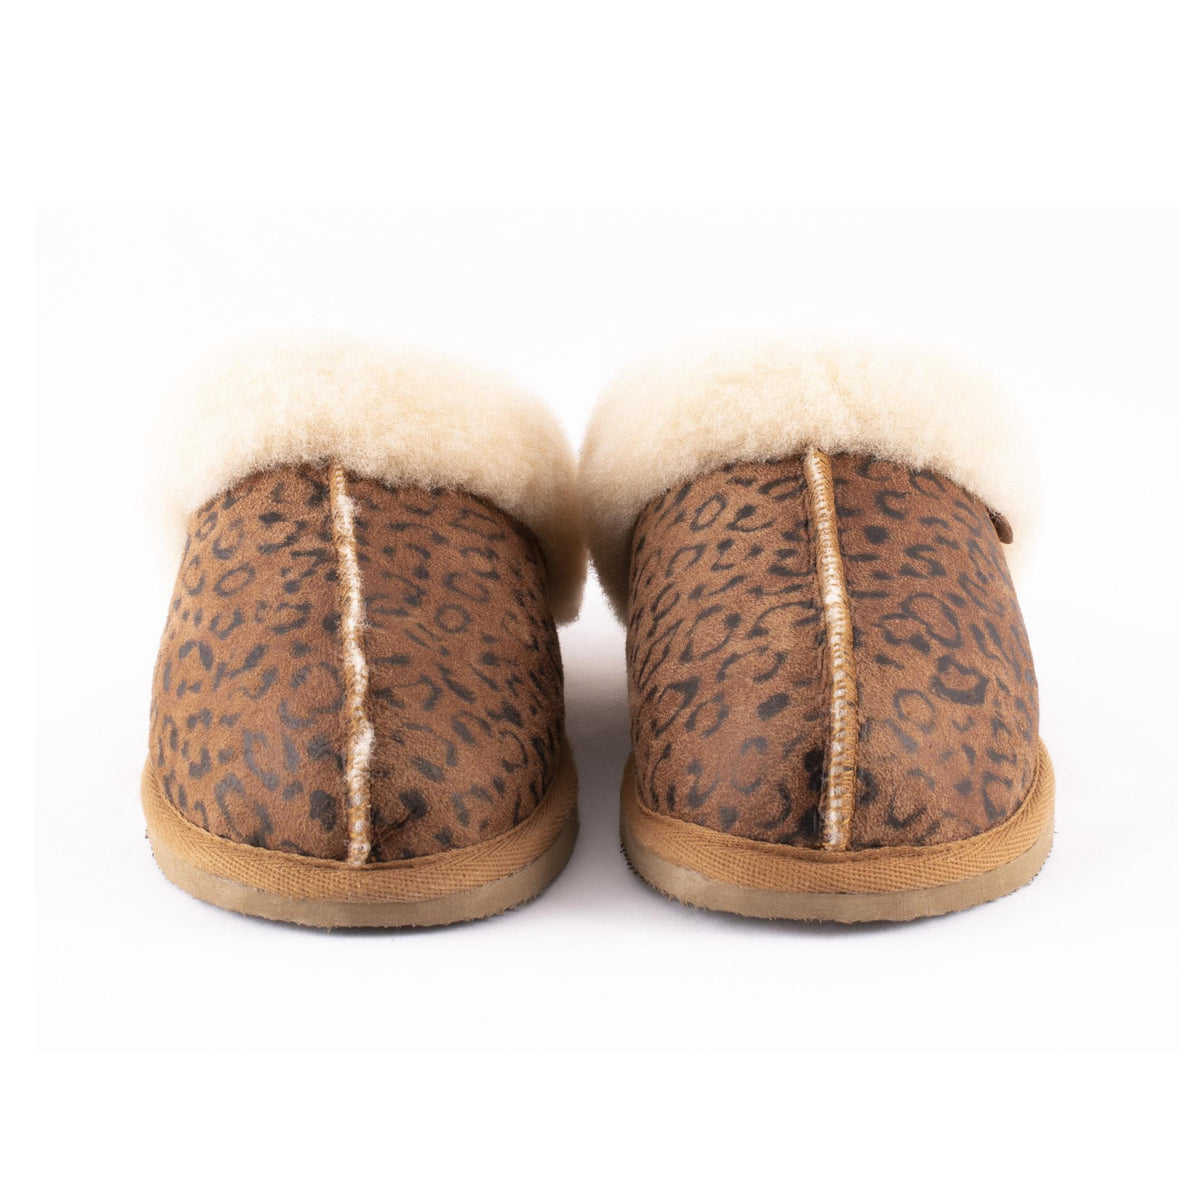 Shepherd of Sweden Sheepskin Slippers in leopard print. Available to buy from our UK independent store.  Photographed as a pair